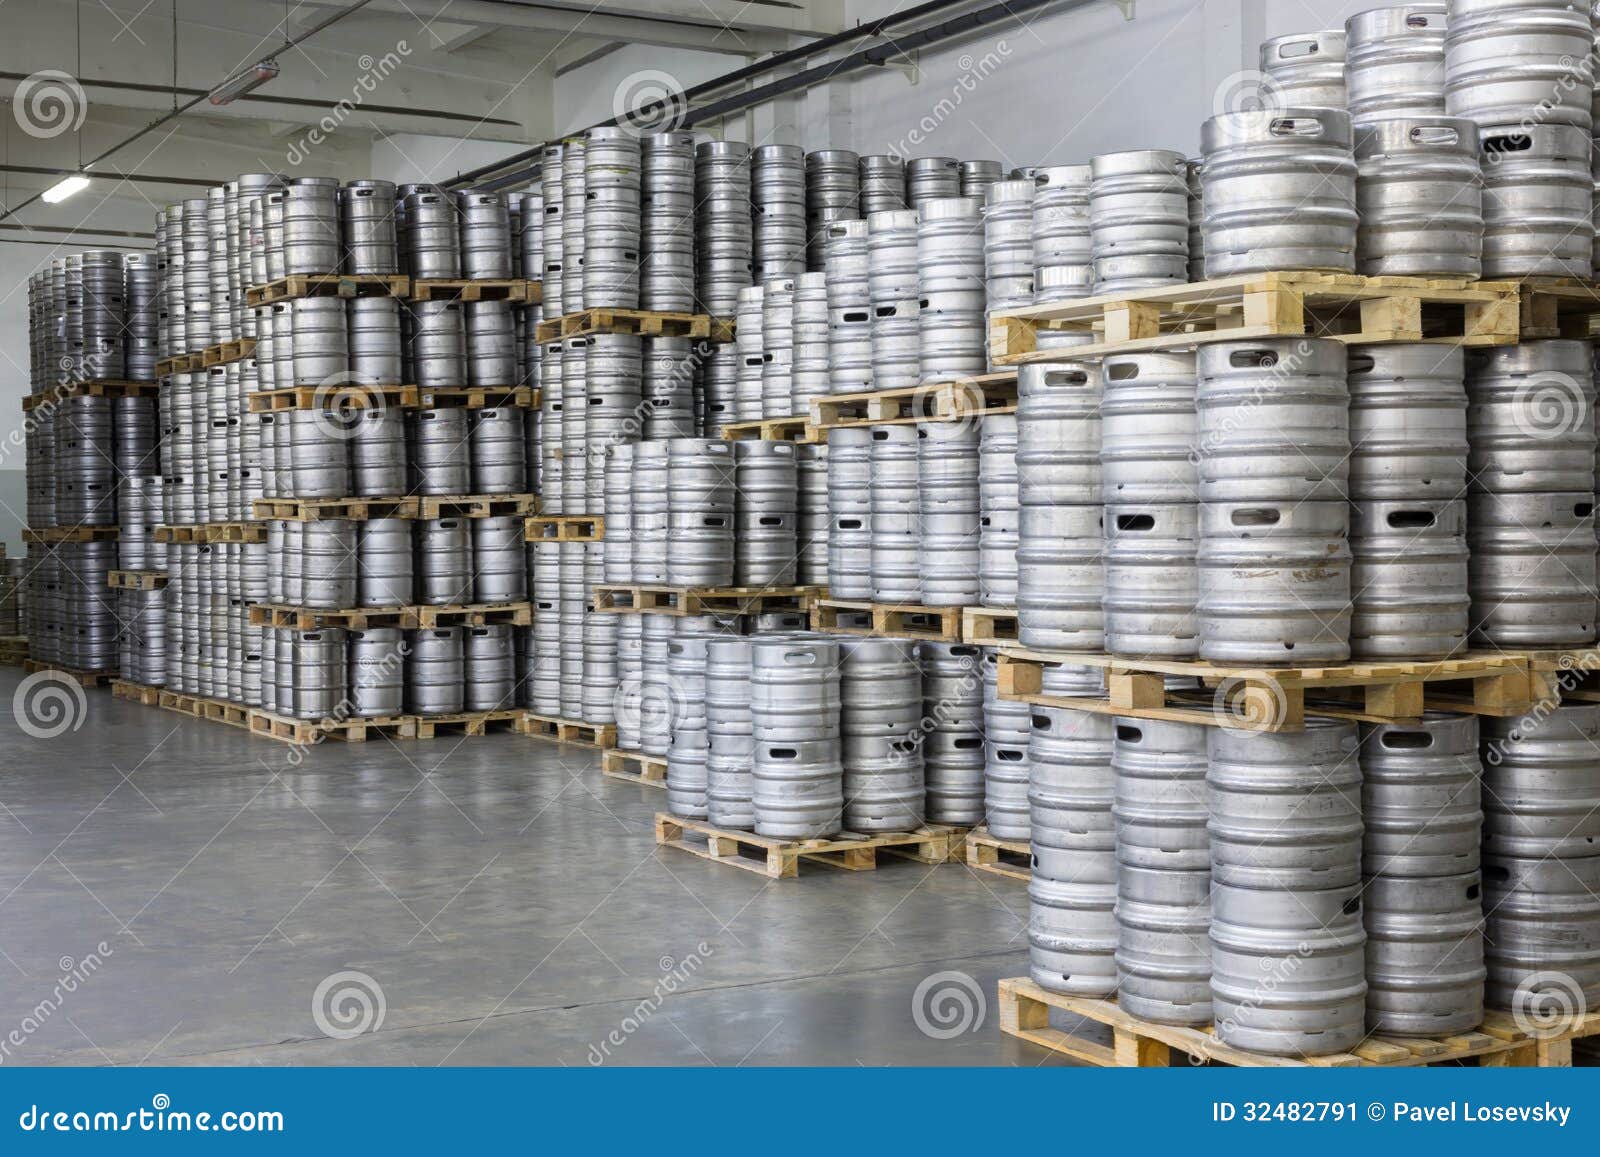 pallets-beer-kegs-stock-brewery-ochakovo-moscow-oct-october-moscow-russia-largest-russian-company-32482791.jpg